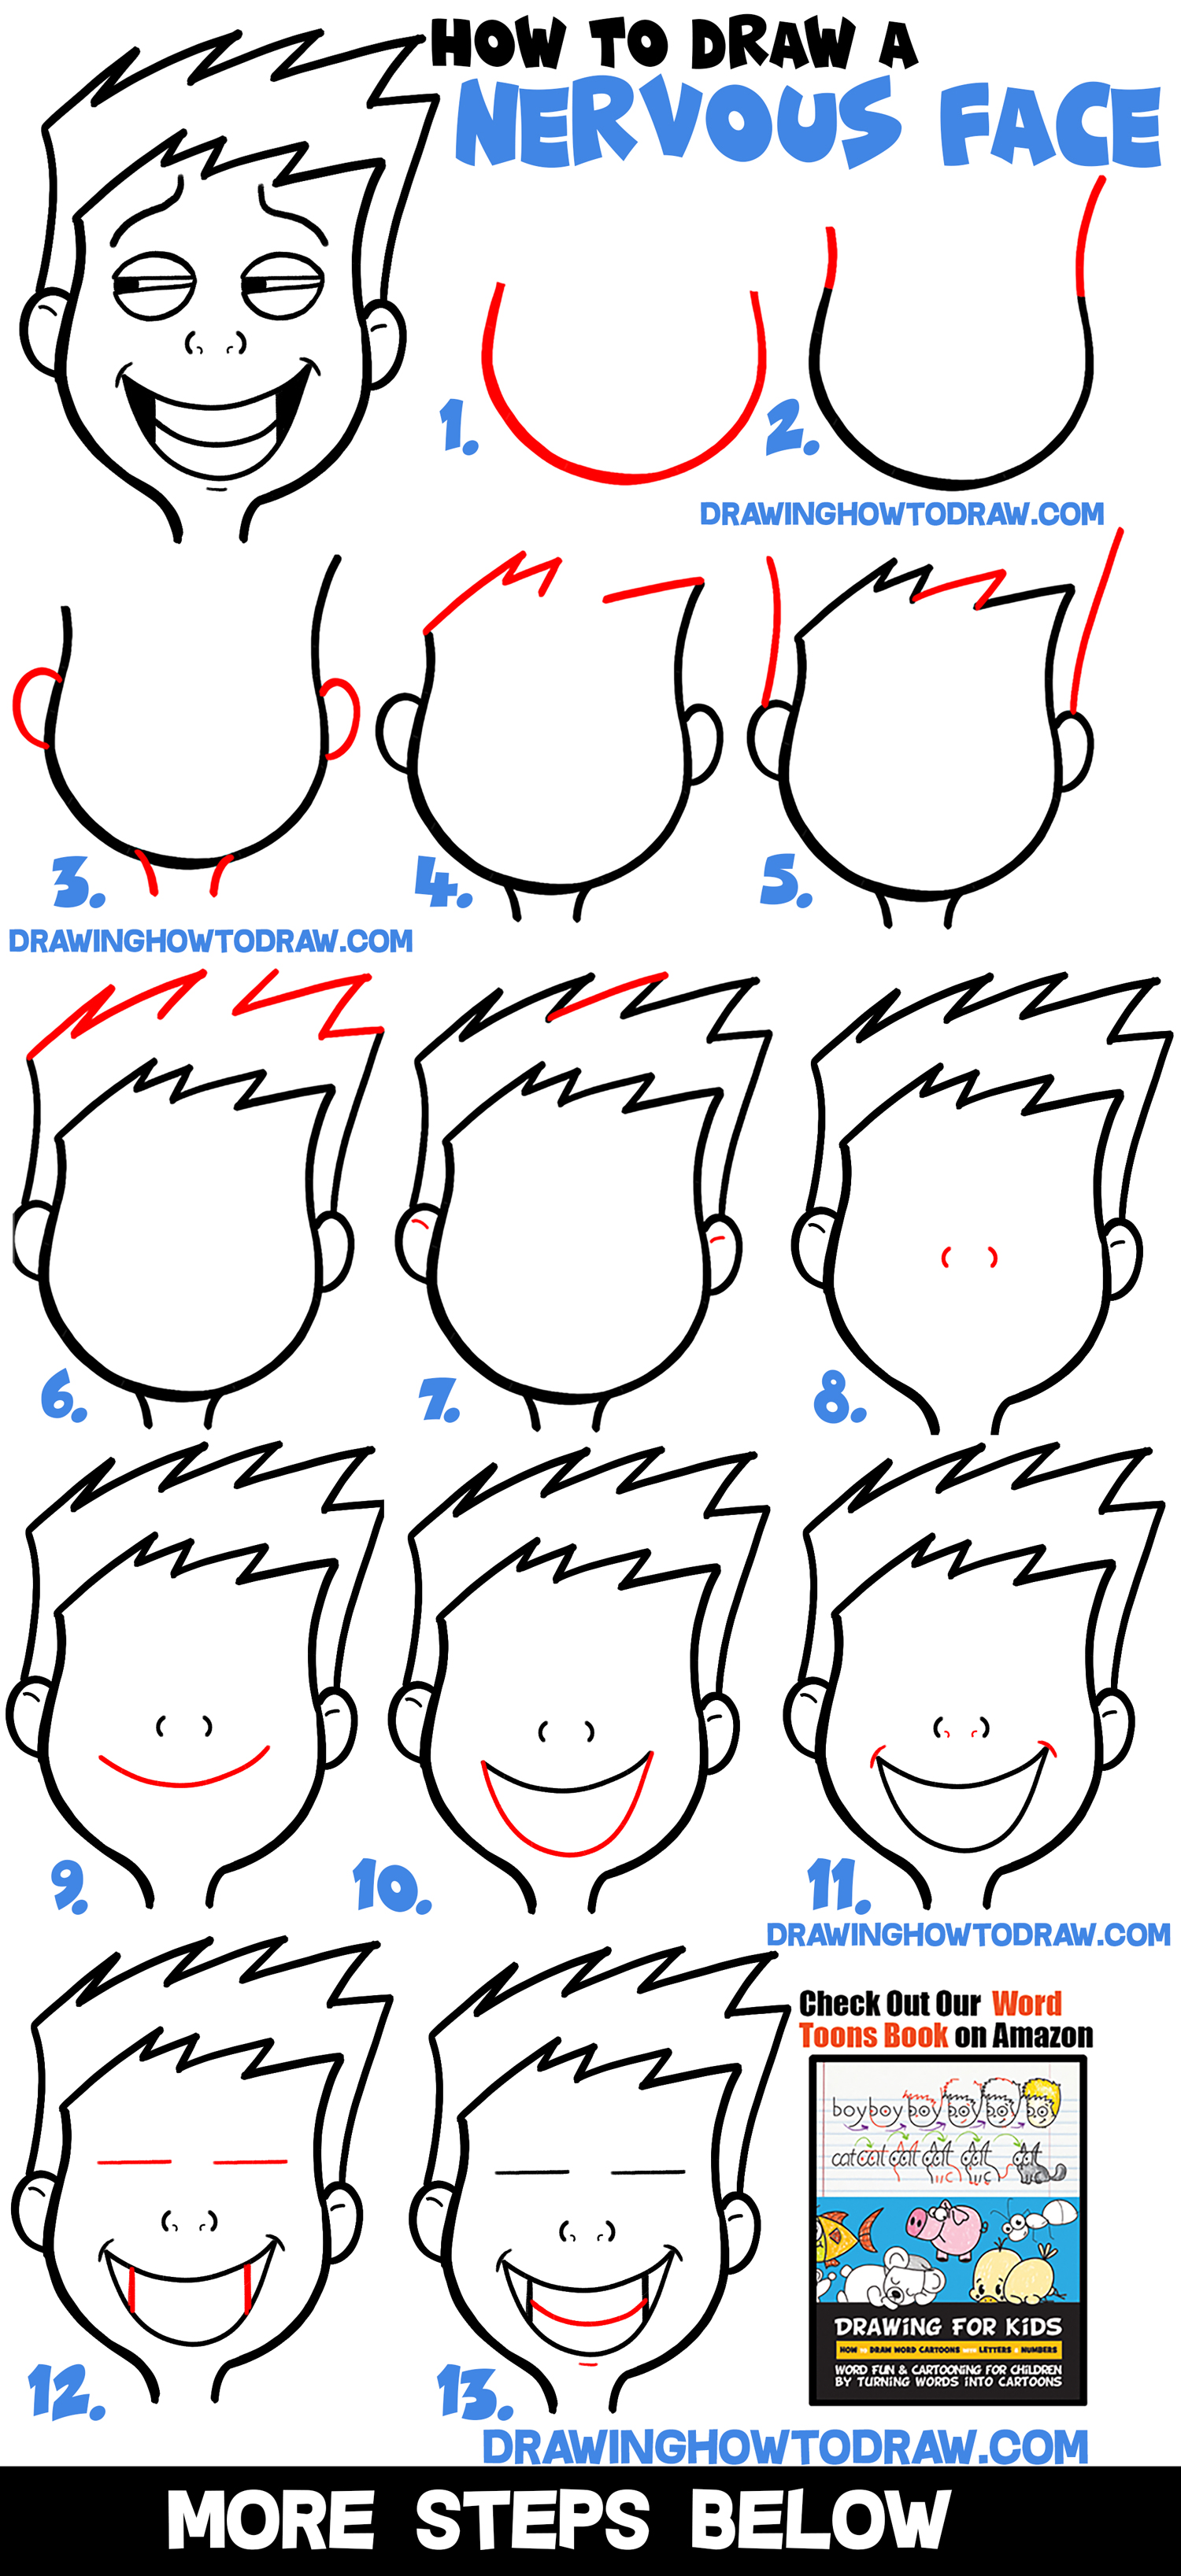 Learn How to Draw Cartoon Facial Expressions : Uneasy, Uncomfortable, Embarrassed, Nervous Easy Step by Step Drawing Tutorial for Beginners